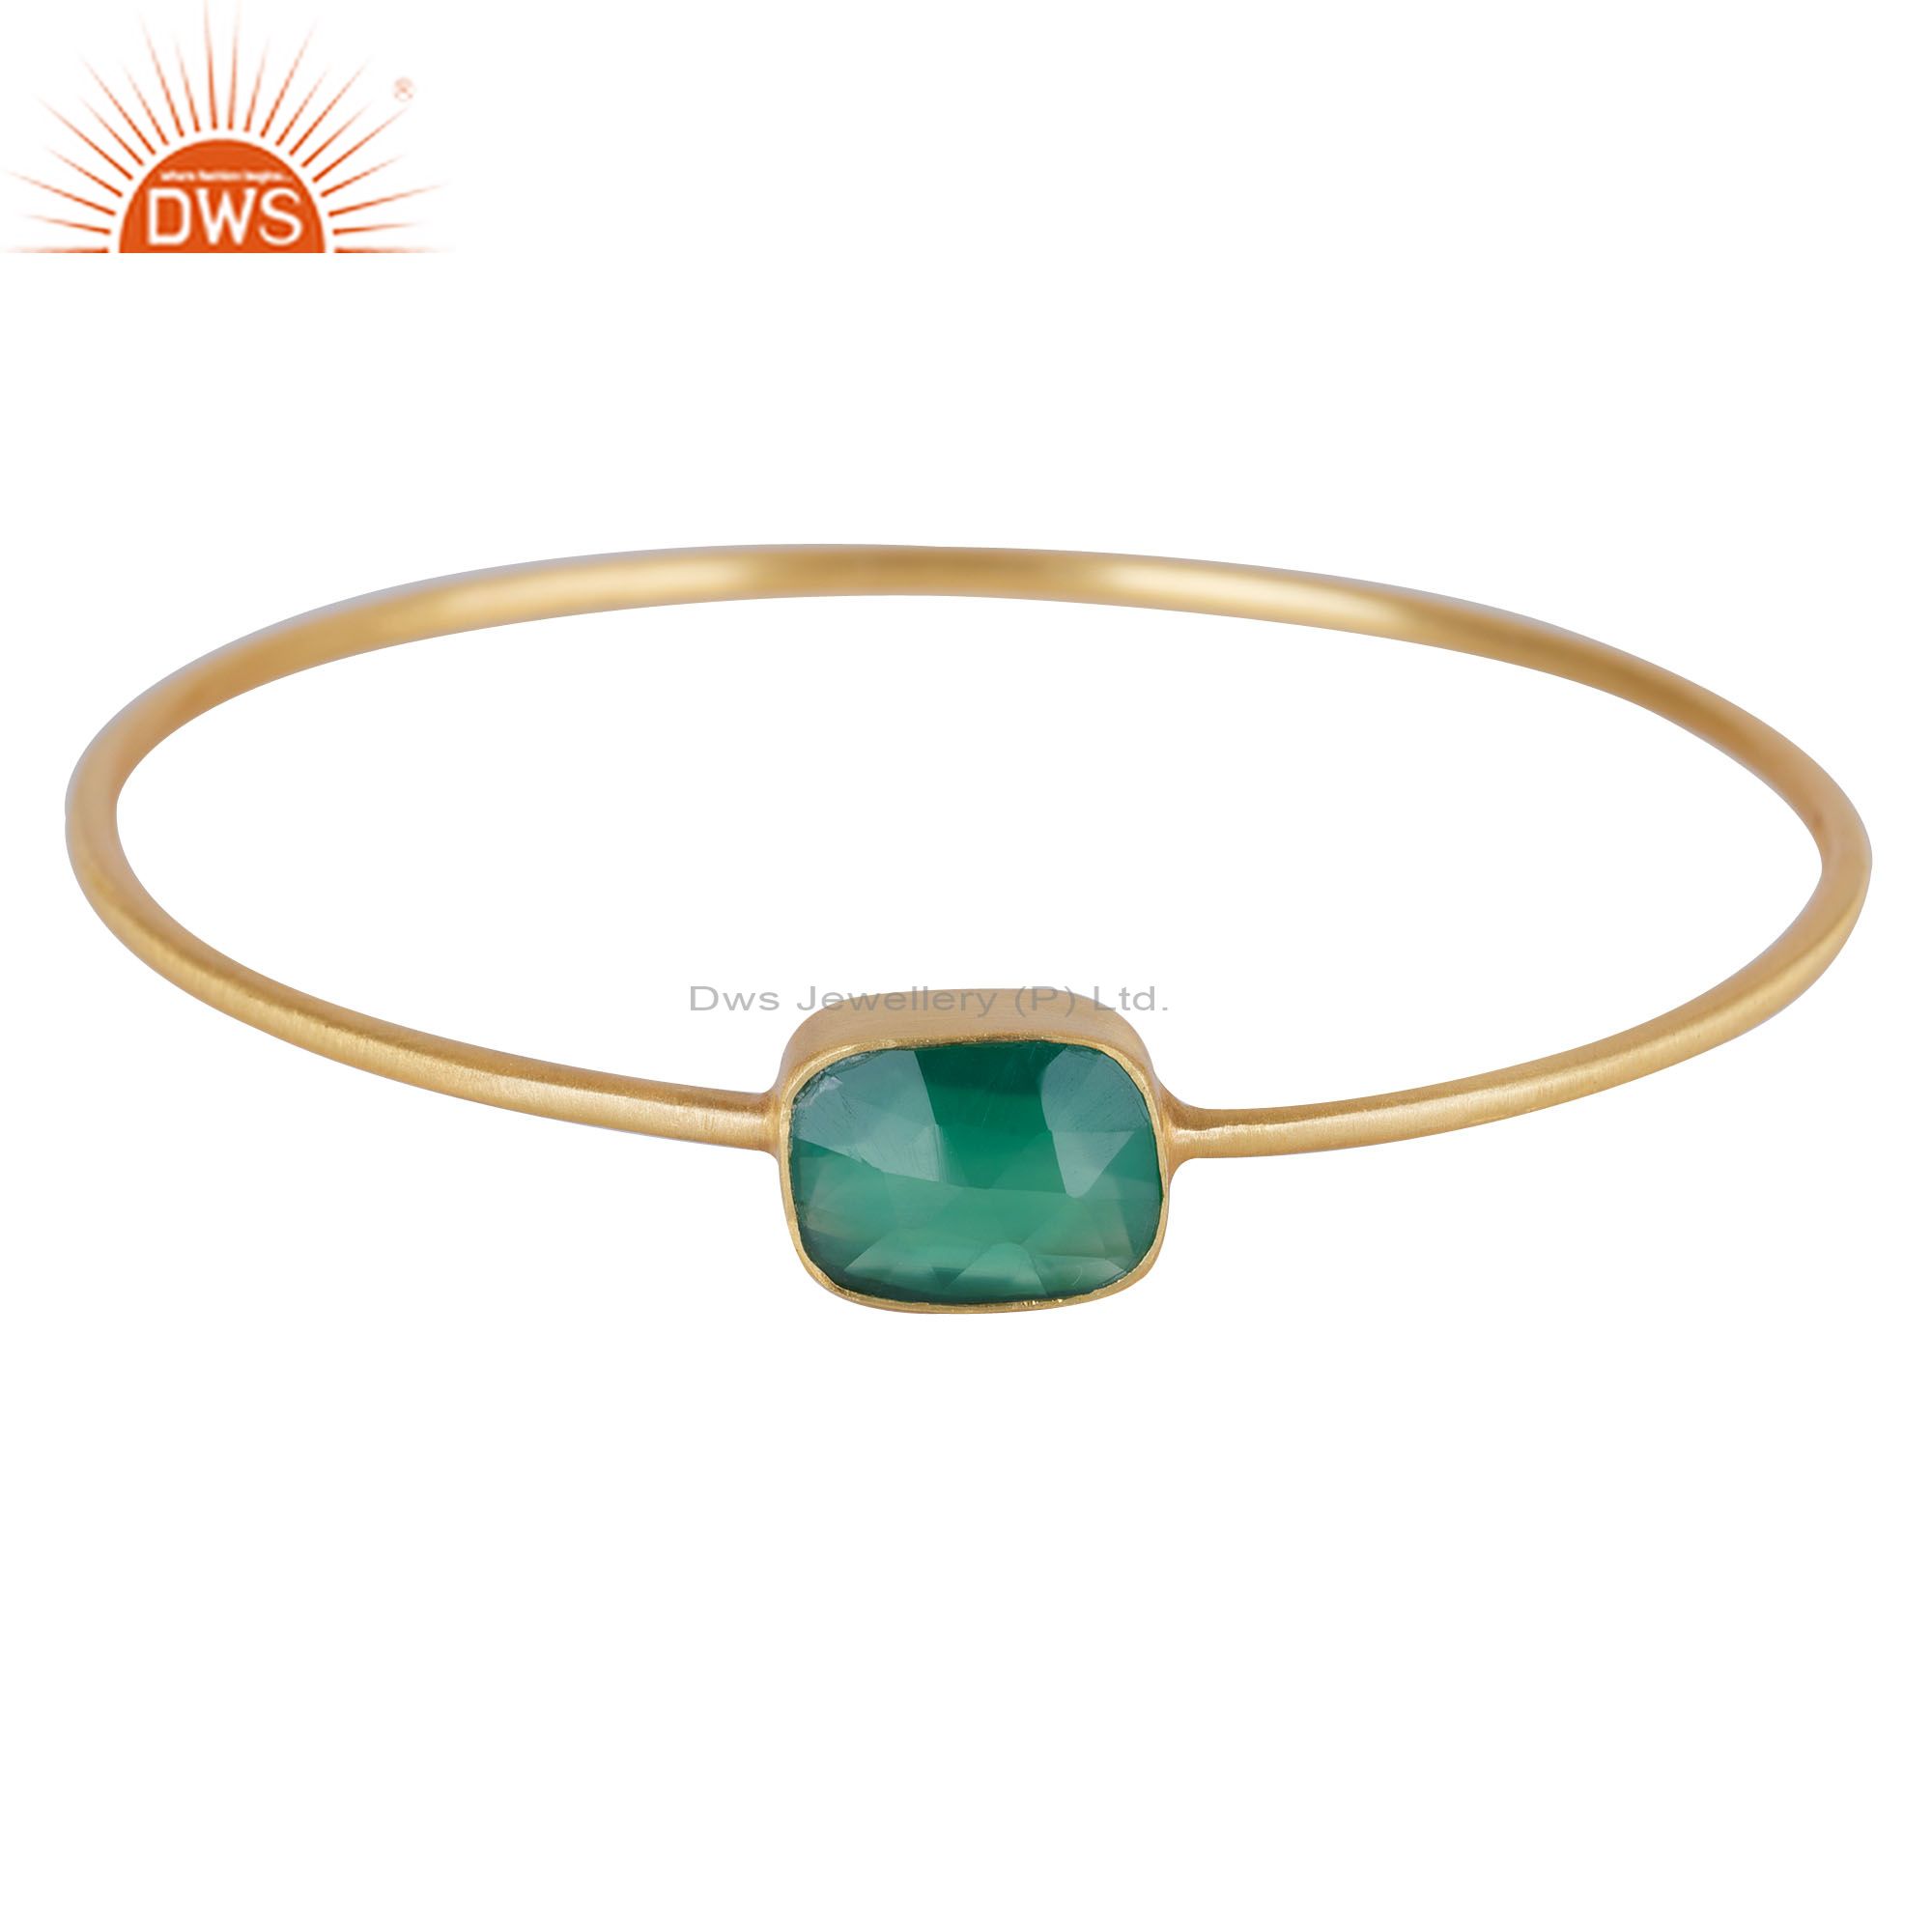 18k yellow gold over sterling silver green onyx sleek bangle